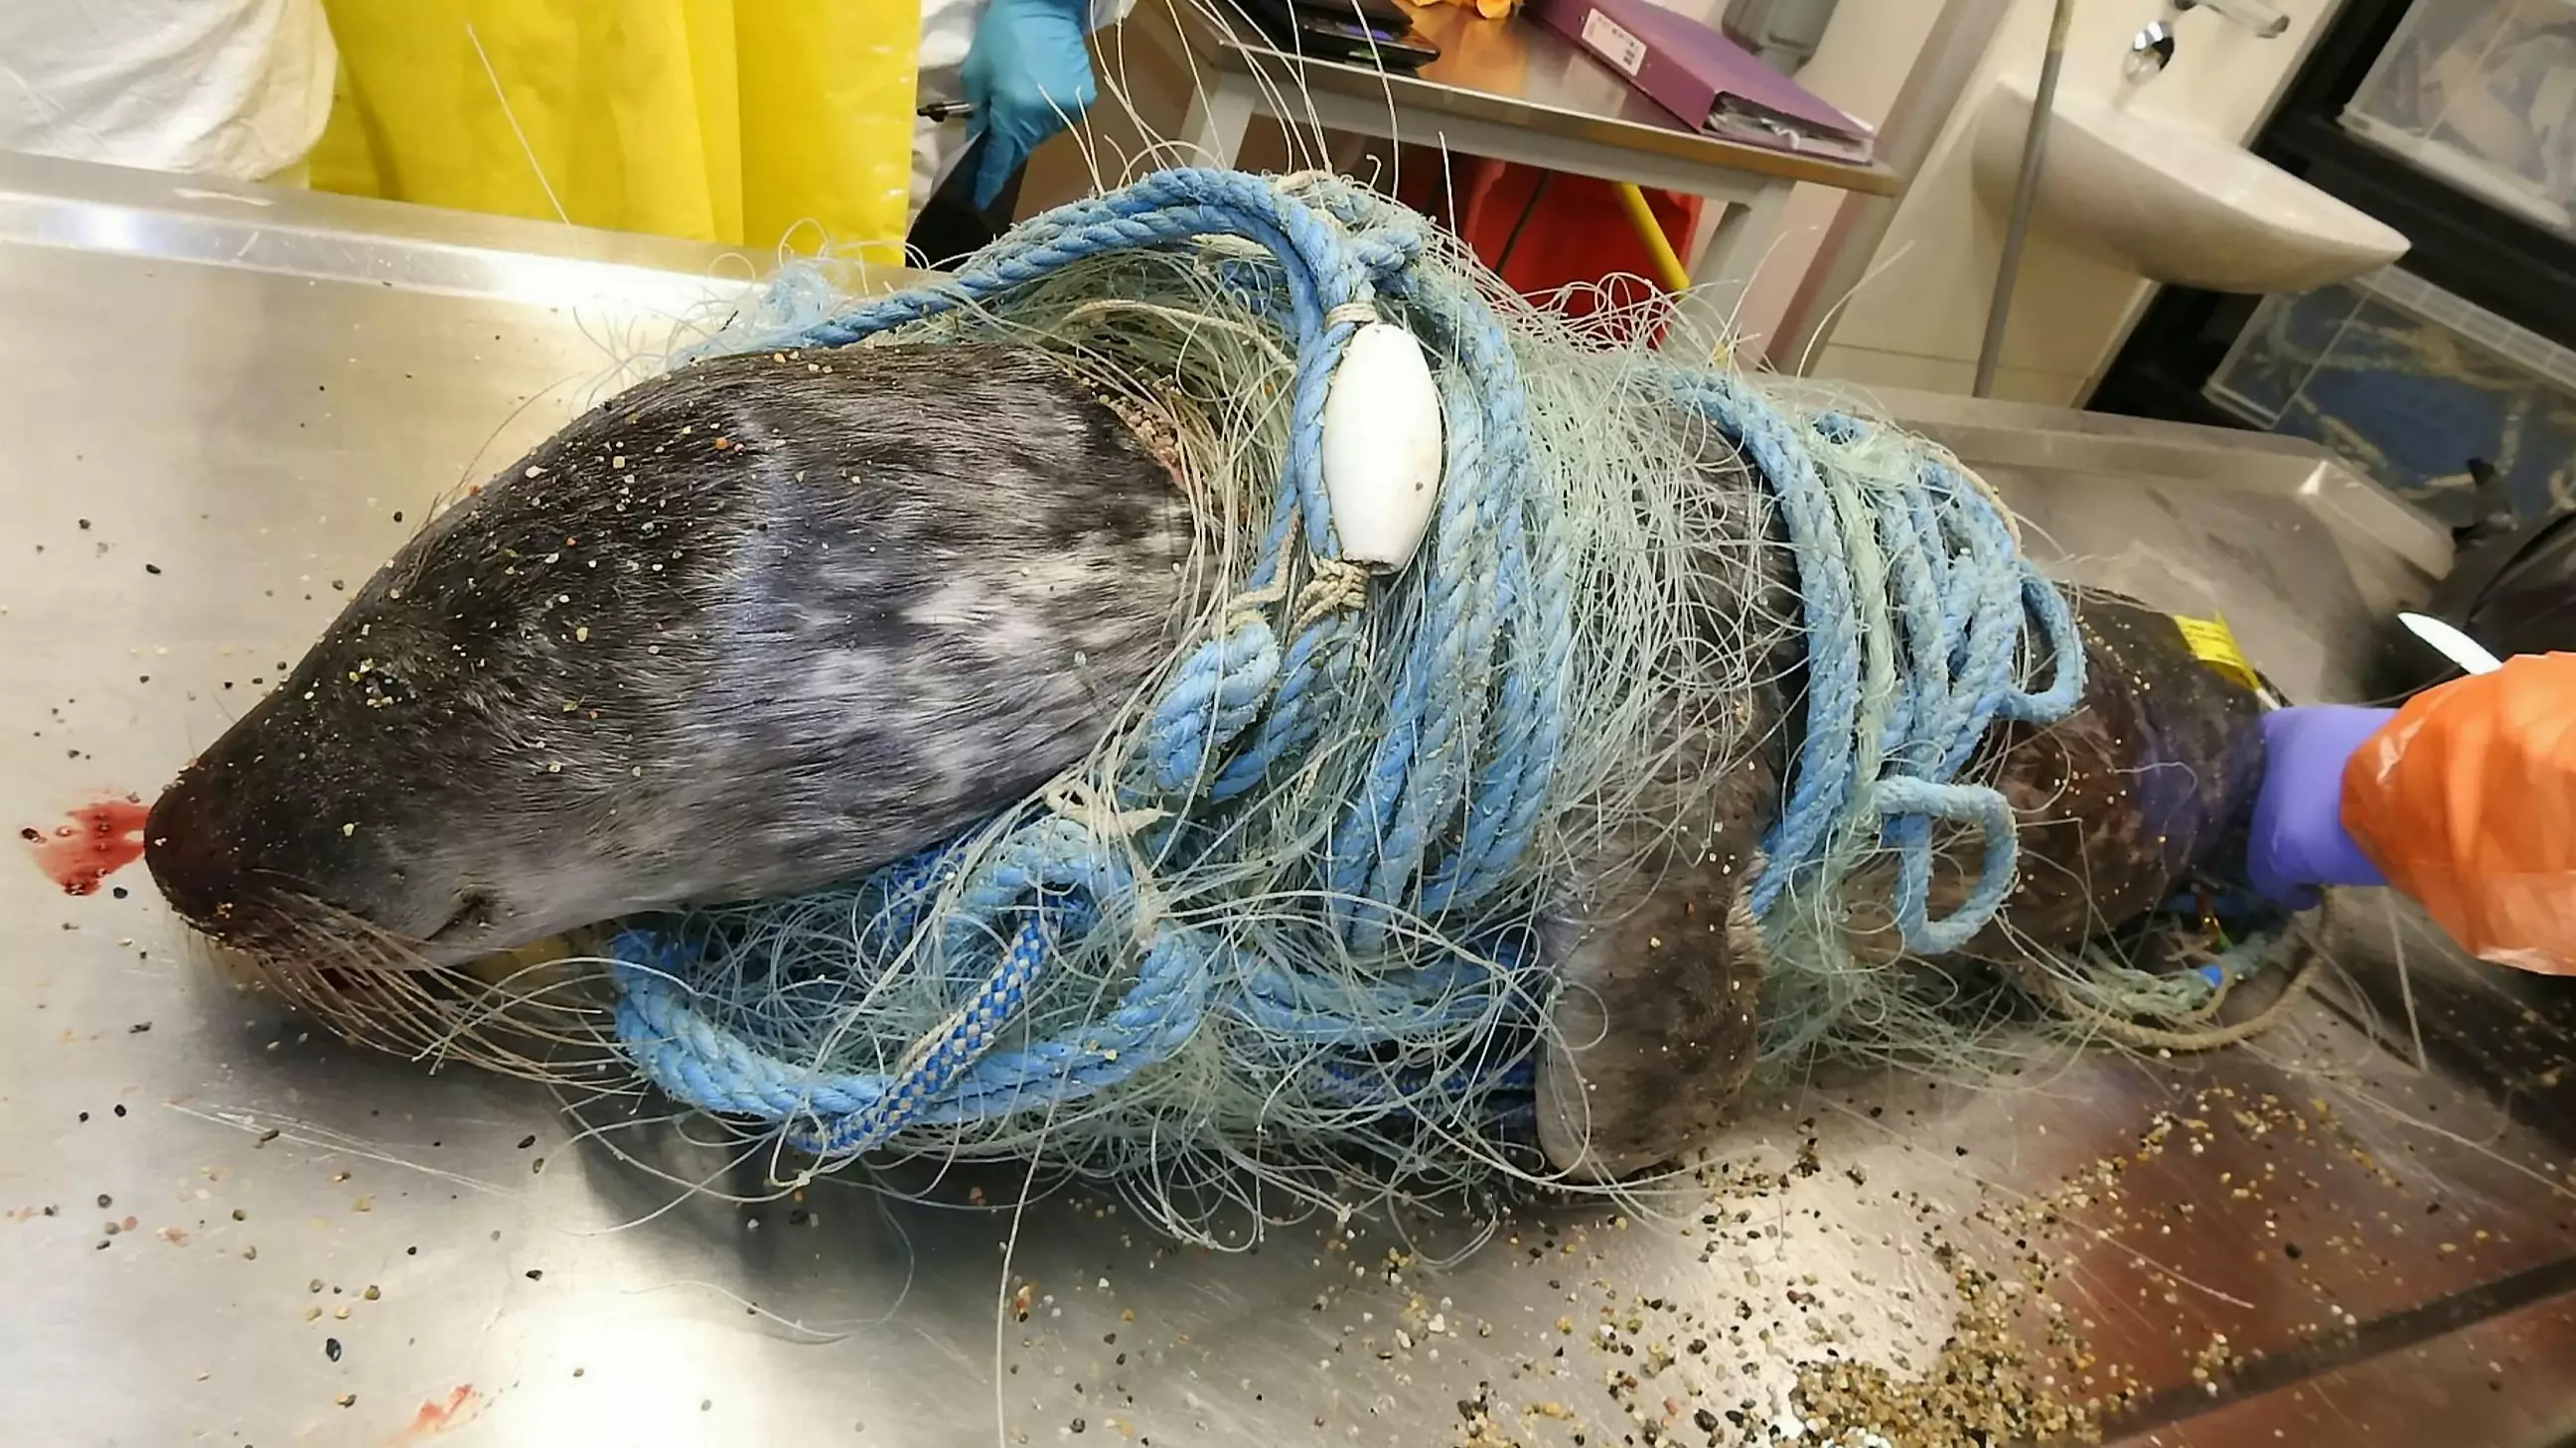 Vet Releases Confronting Pictures Of Dolphin And Seal Wrapped In Disused Fishing Nets